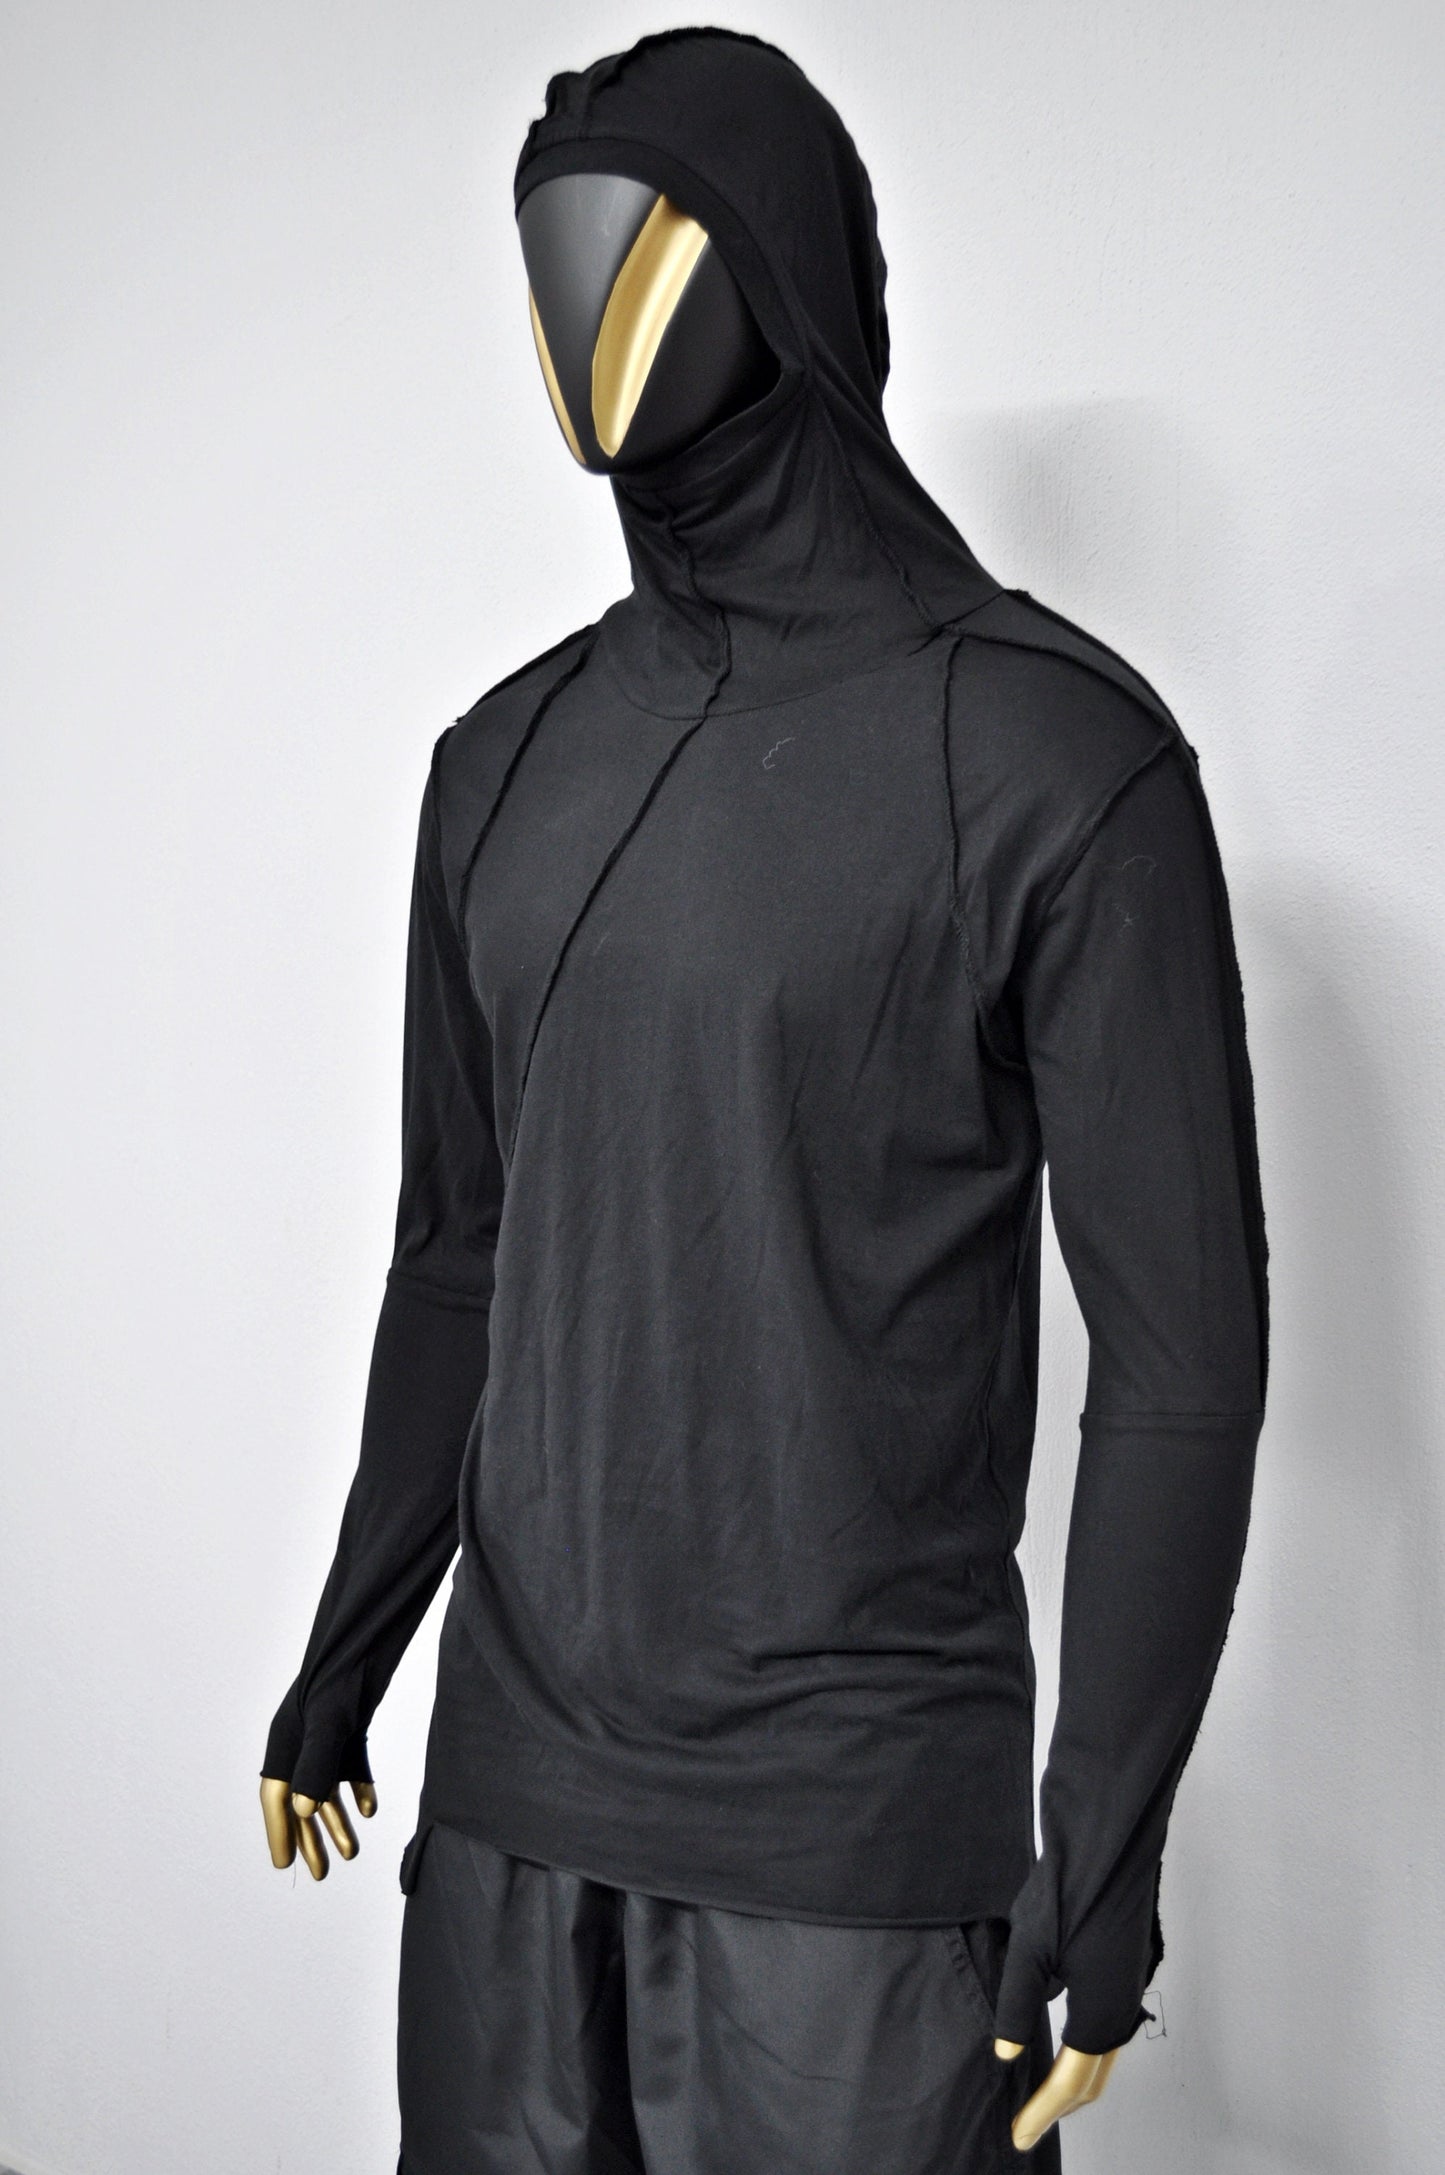 XS-8XL Men's Black Long Sleeve,Turtle Neck Thumb Hole Shirts Jumper Cardigan,Sweater,Quilted Utility Dystopian Top,Capsule Whimsigoth -BB471